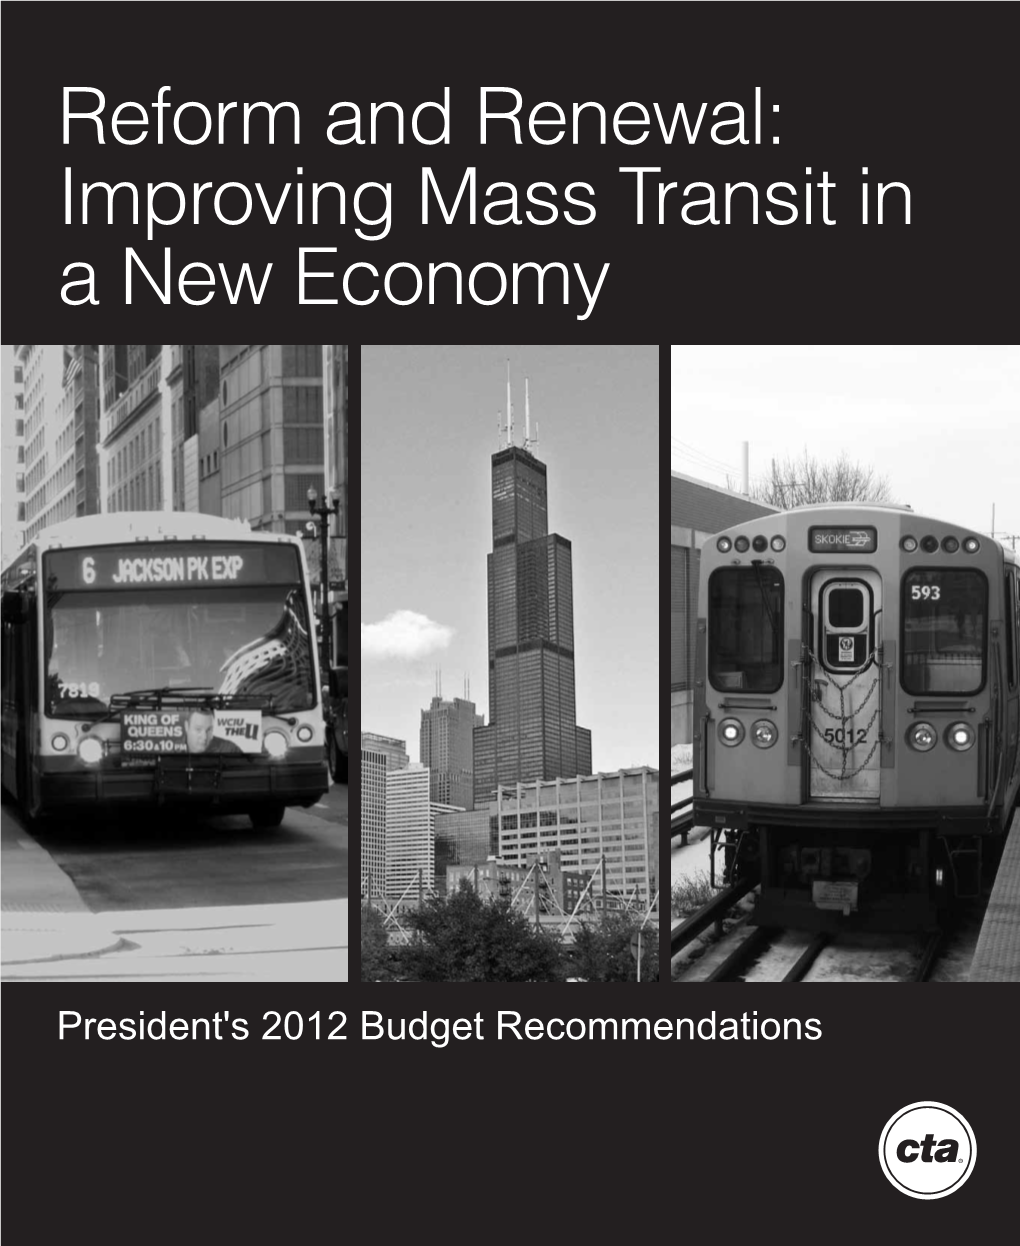 Reform and Renewal: Improving Mass Transit in a New Economy